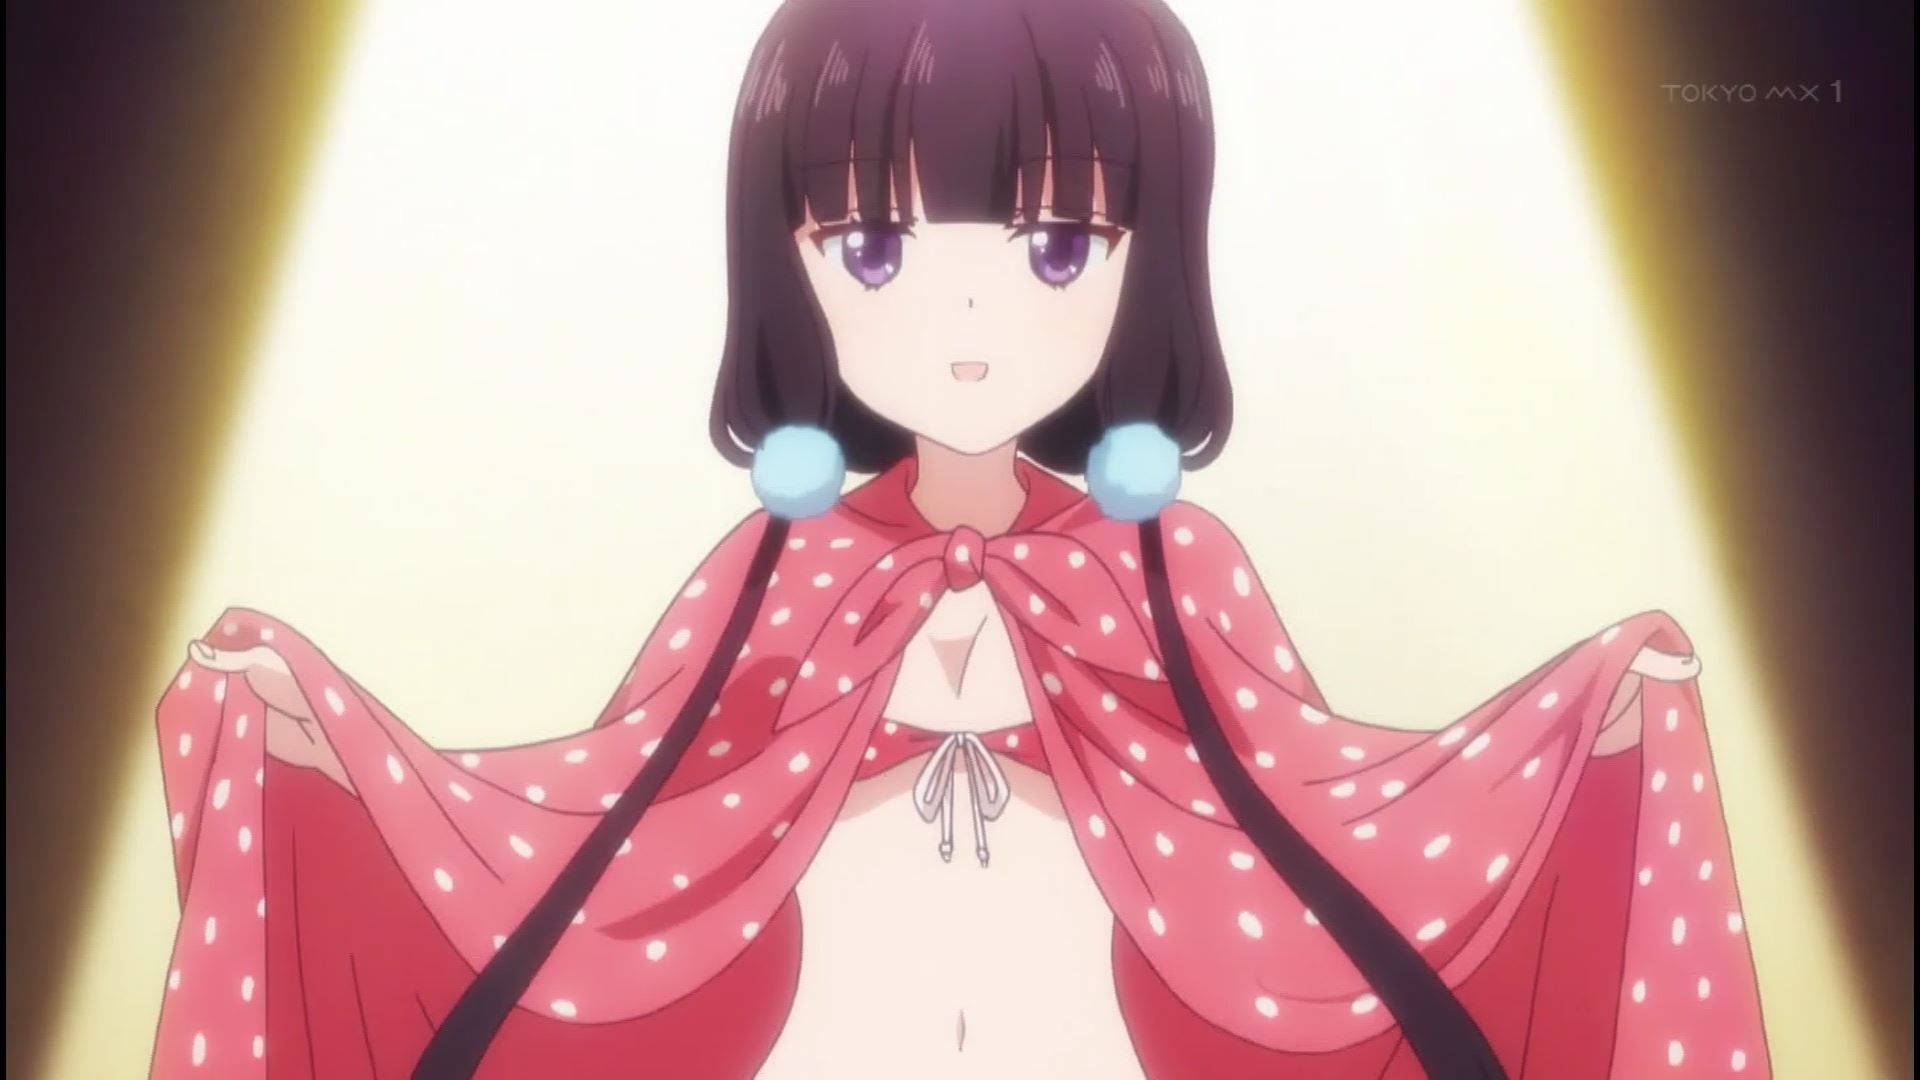 Anime ' blend S ' 6 episodes of girls erotic swimsuit times! such as breasts and buttocks! 3